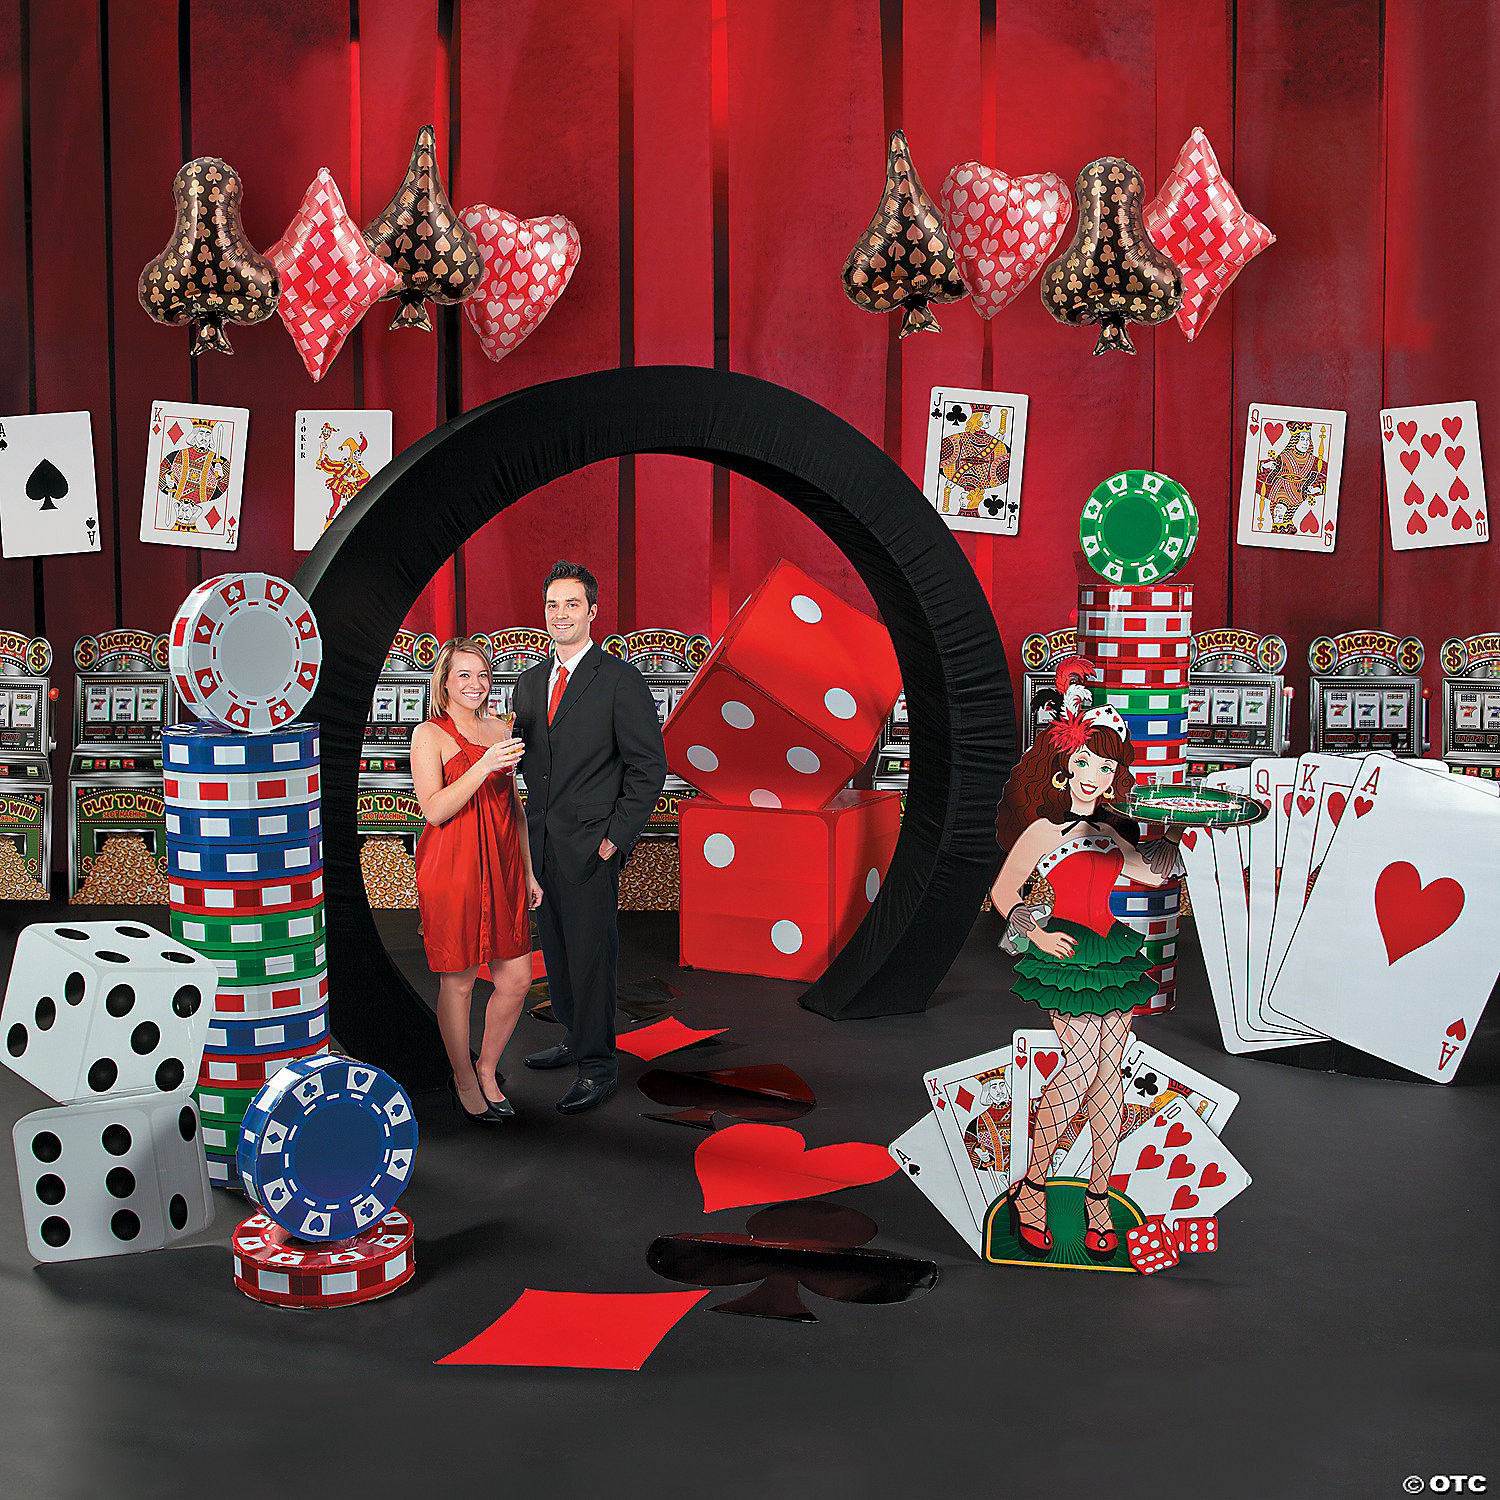 Inexpensive casino party supplies